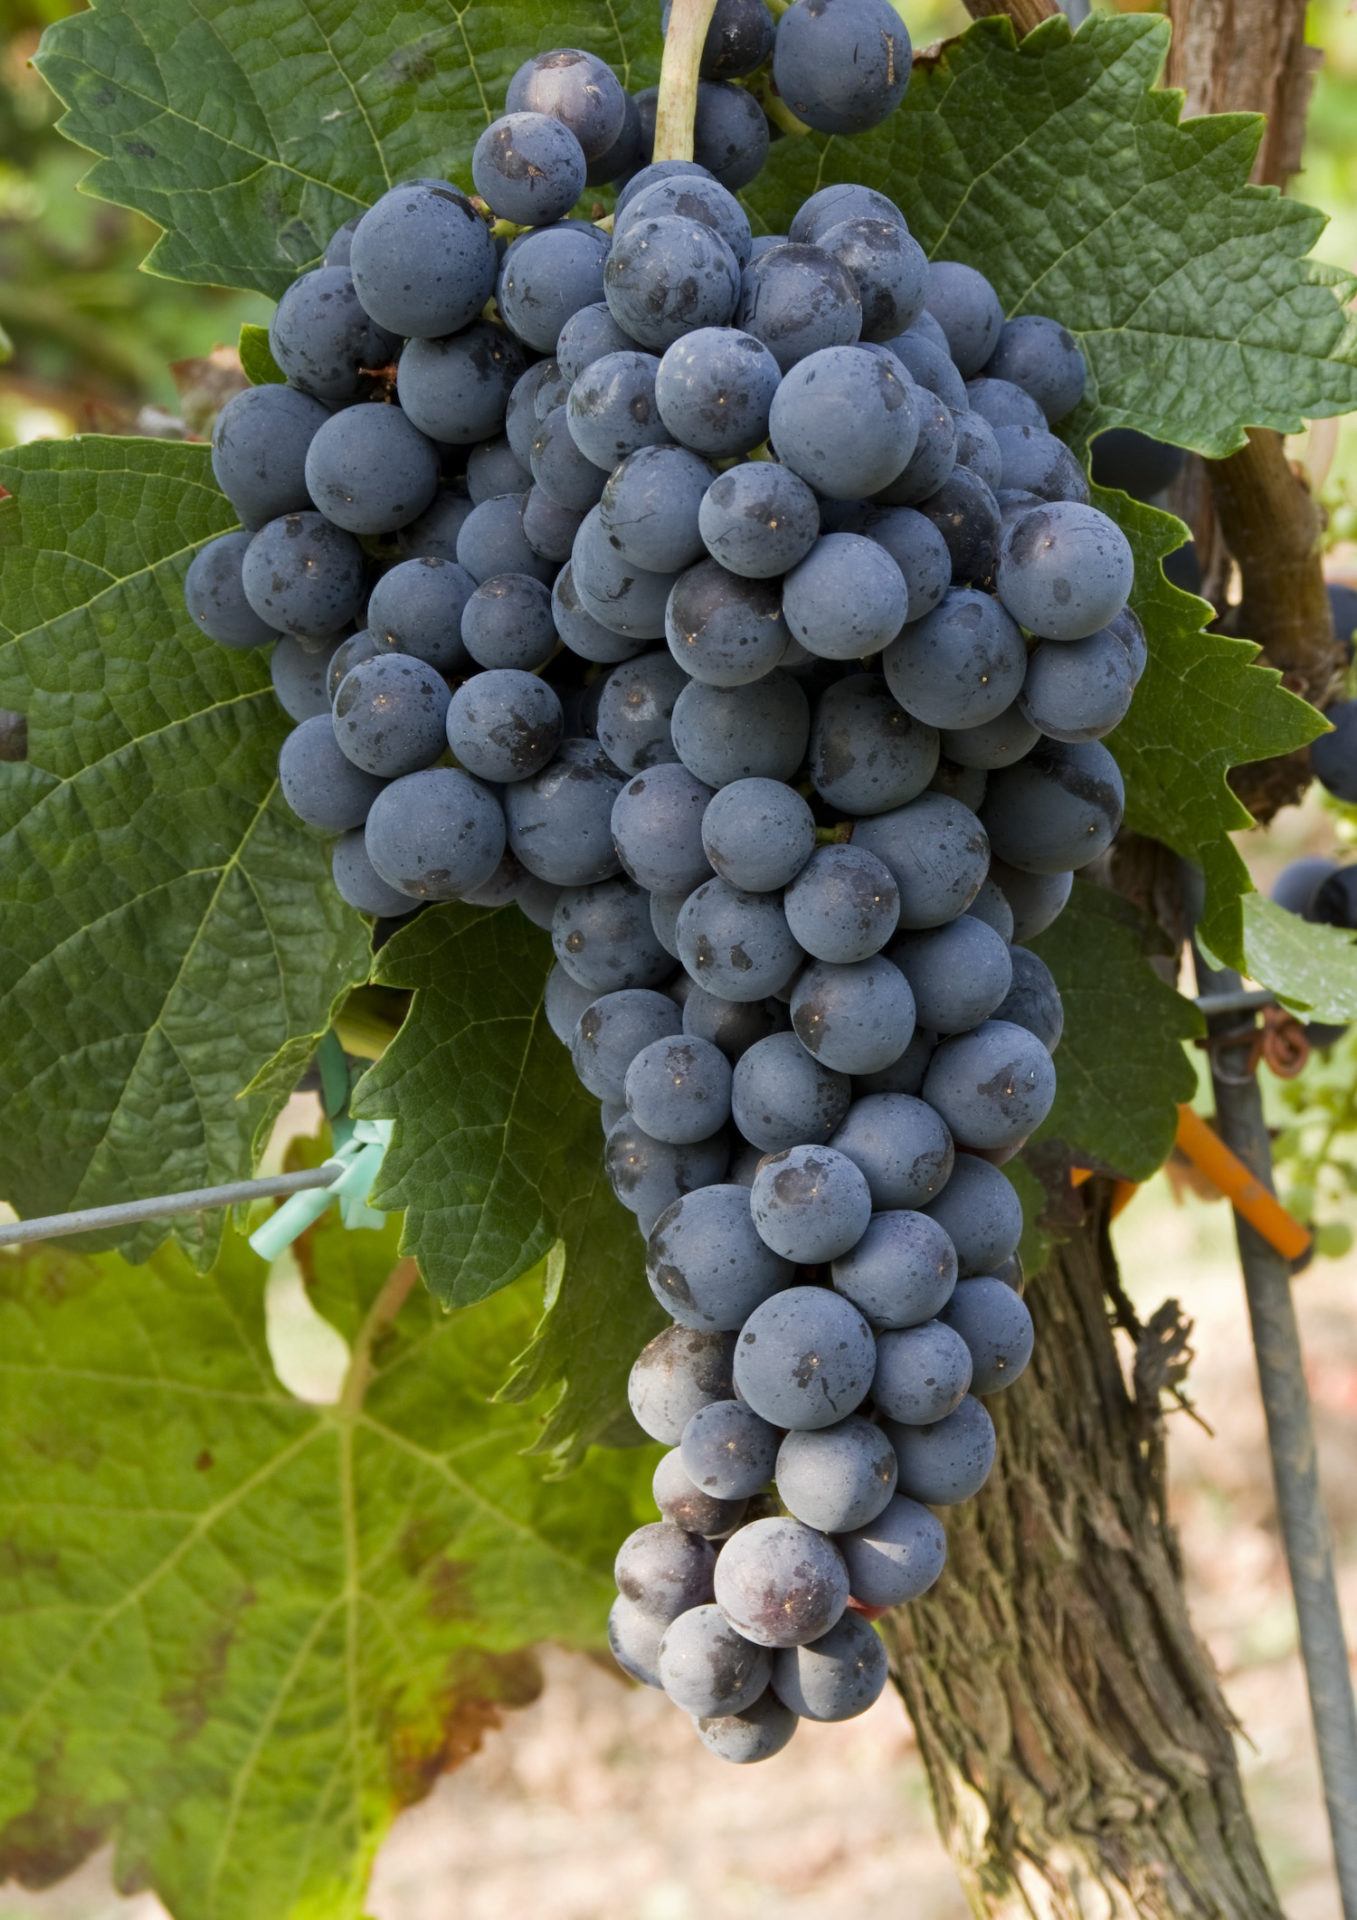 A ripe grape of the red wine variety Merlot on the vine